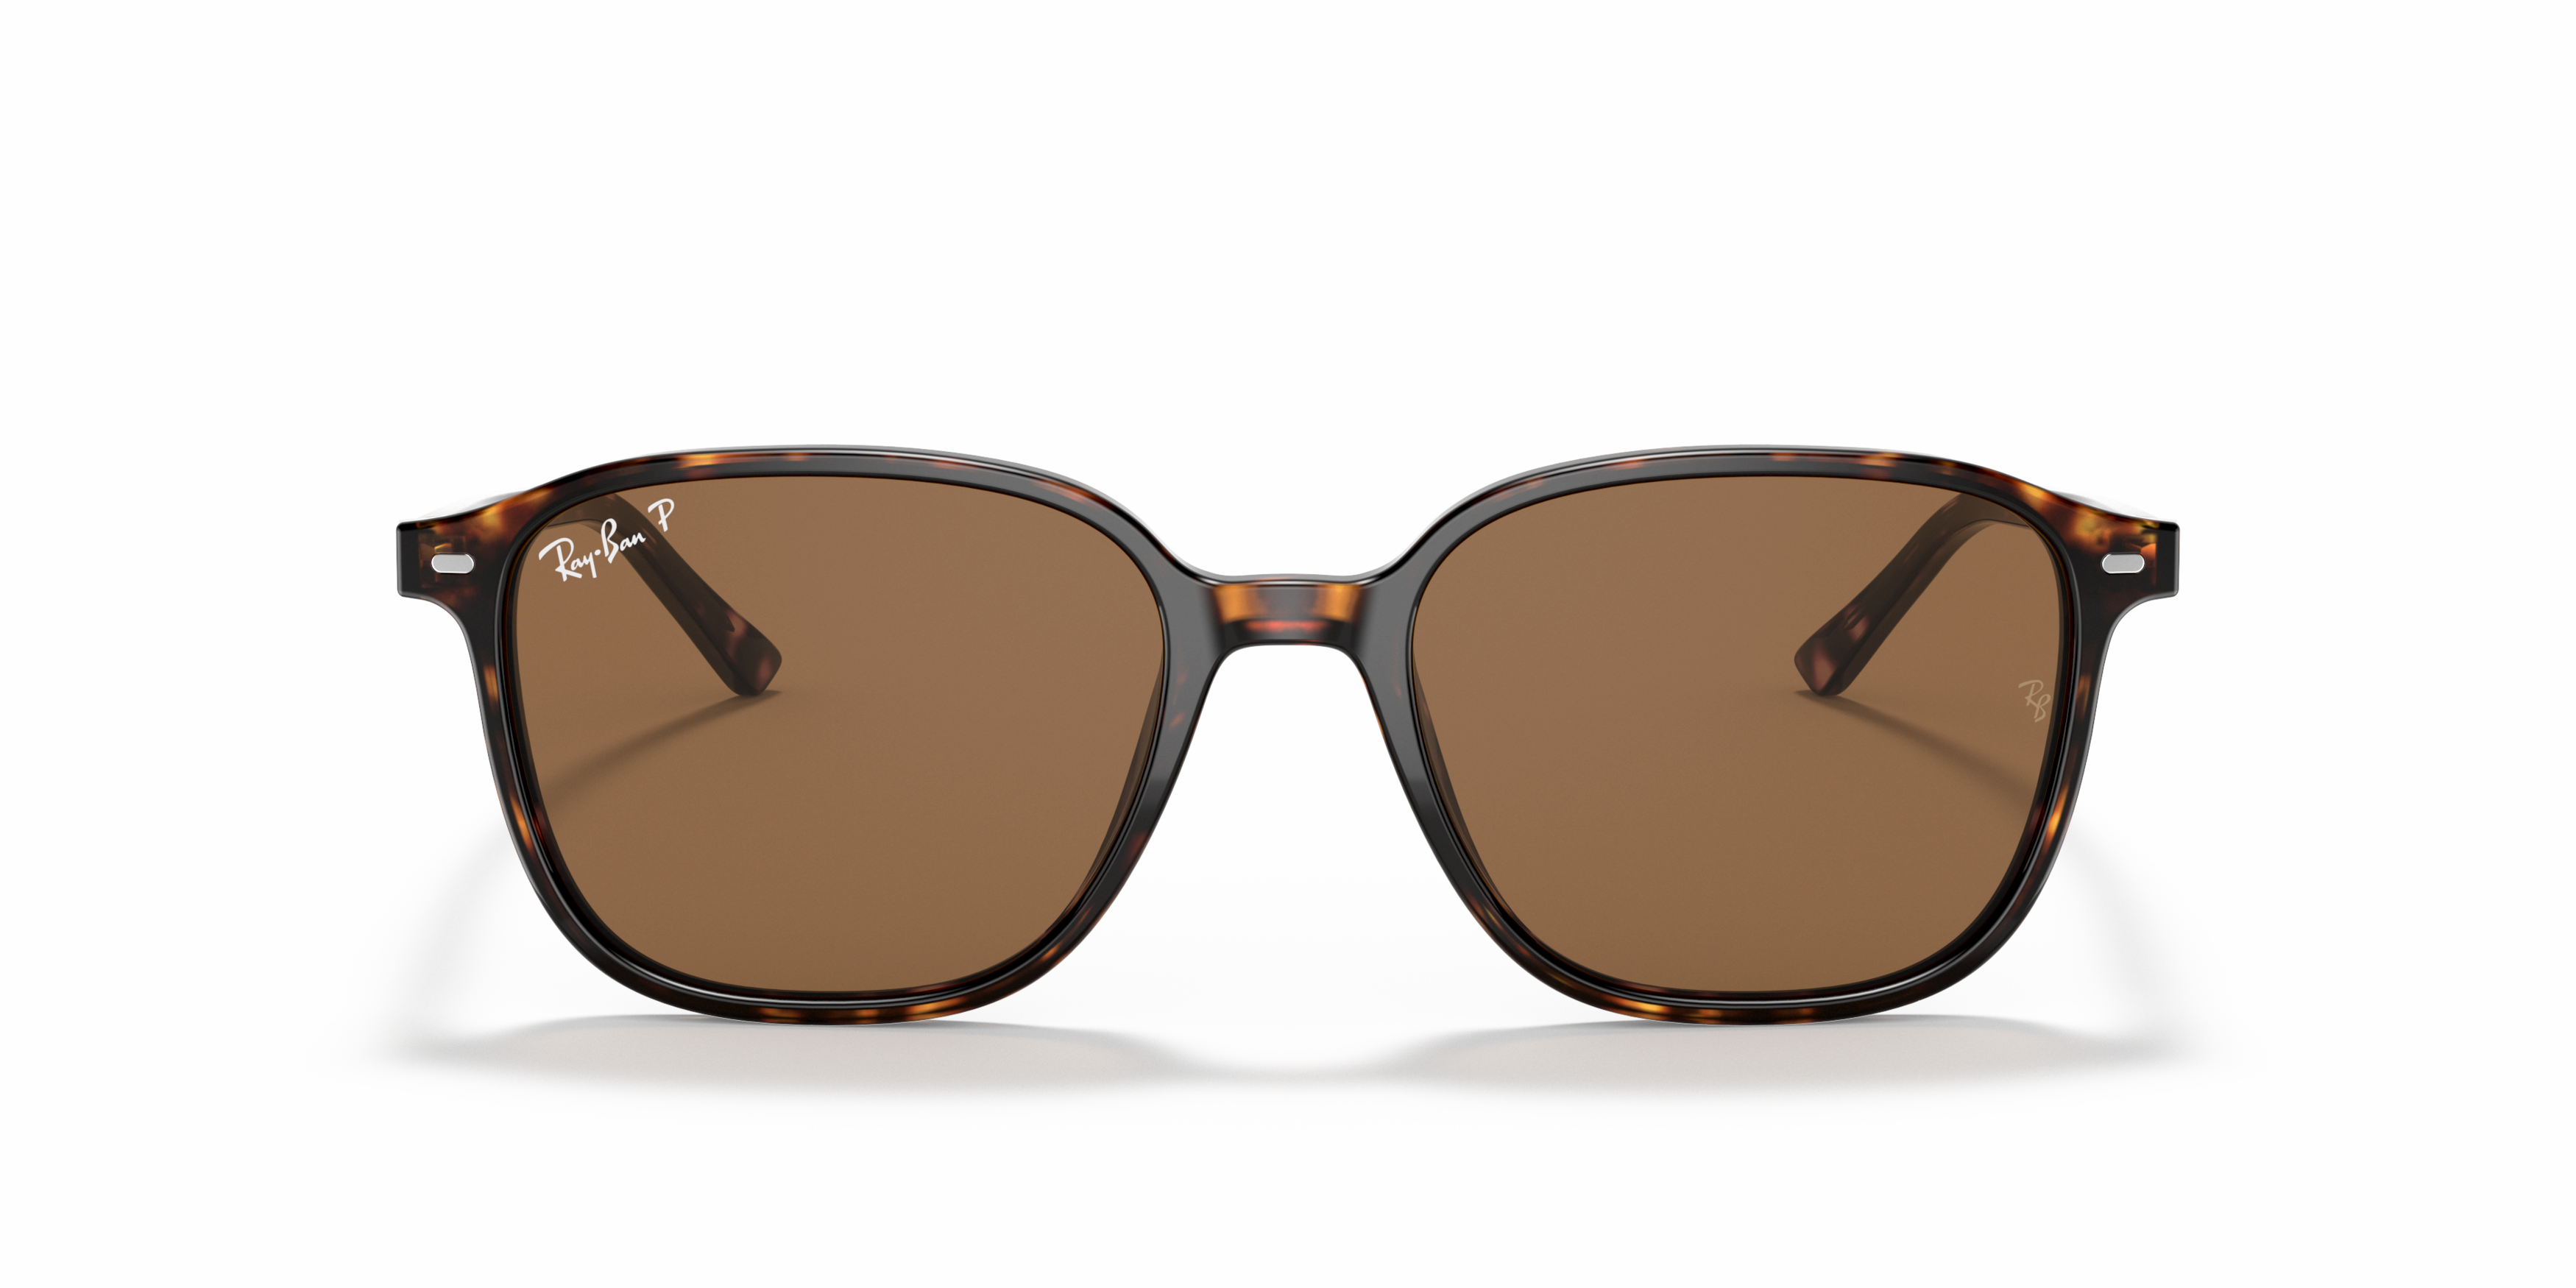 [products.image.front] Ray-Ban Leonard RB2193 902/57